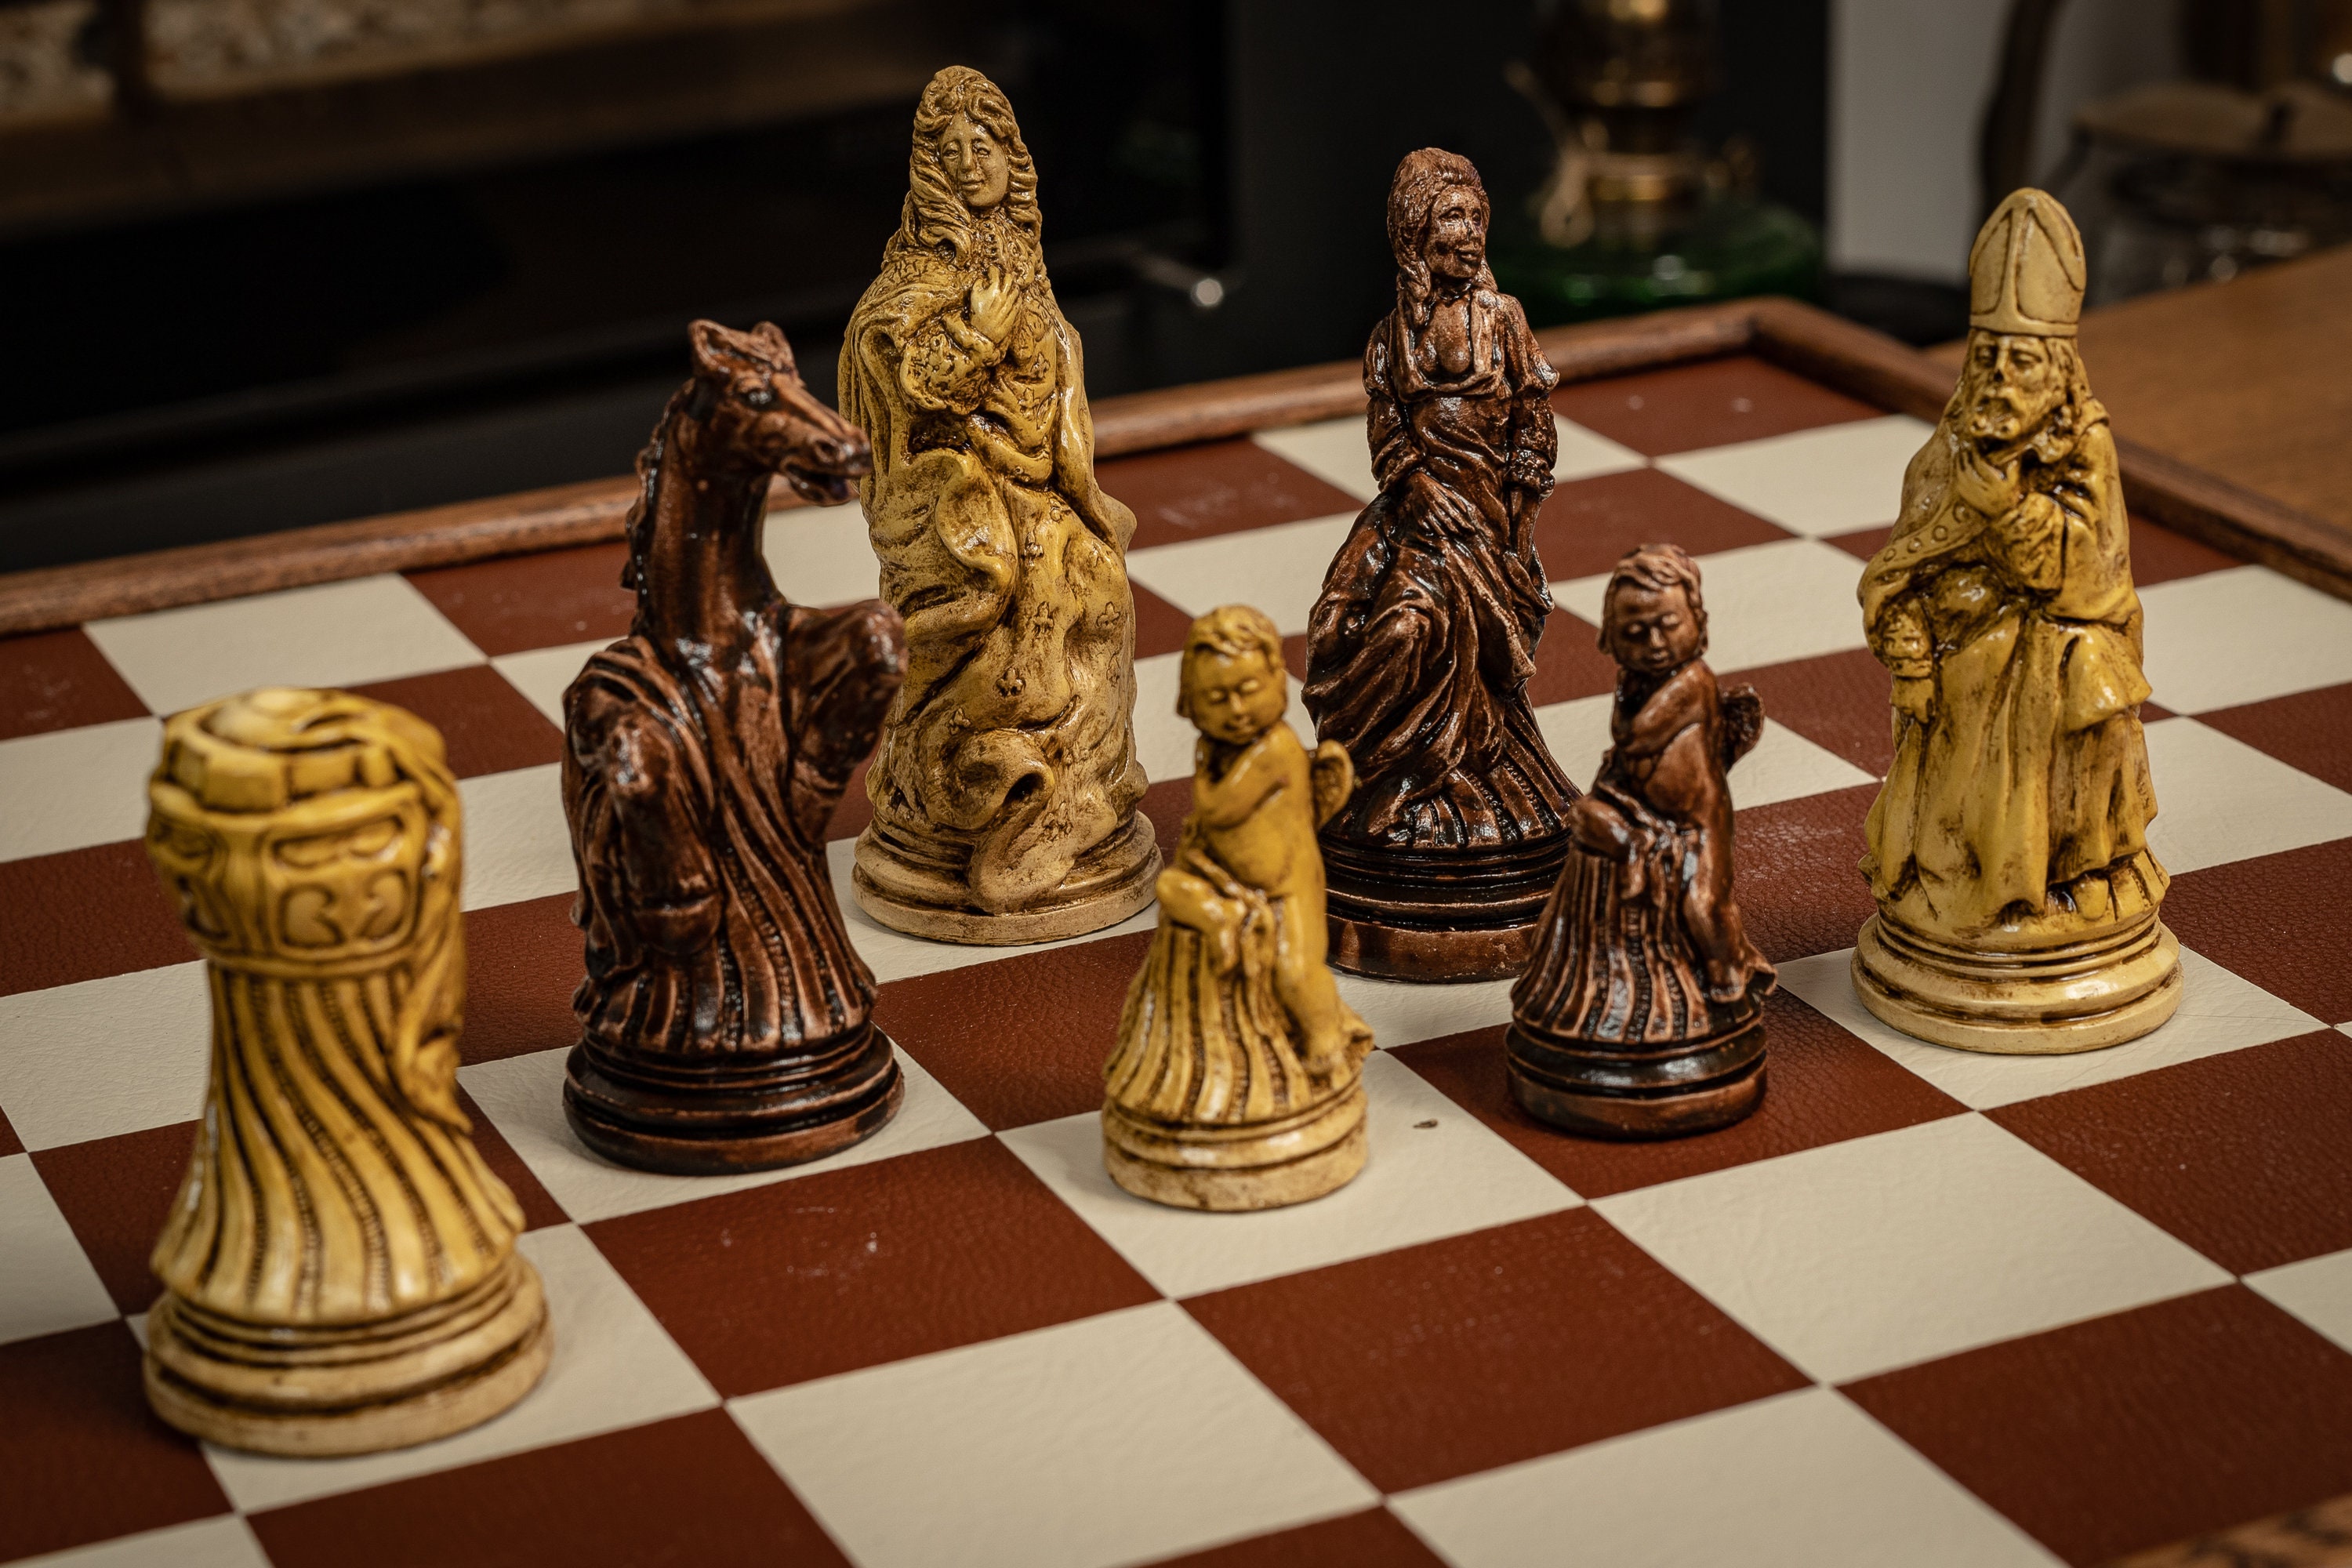 Special Offer Price Chess Set Louis Xiv Design in an Aged 